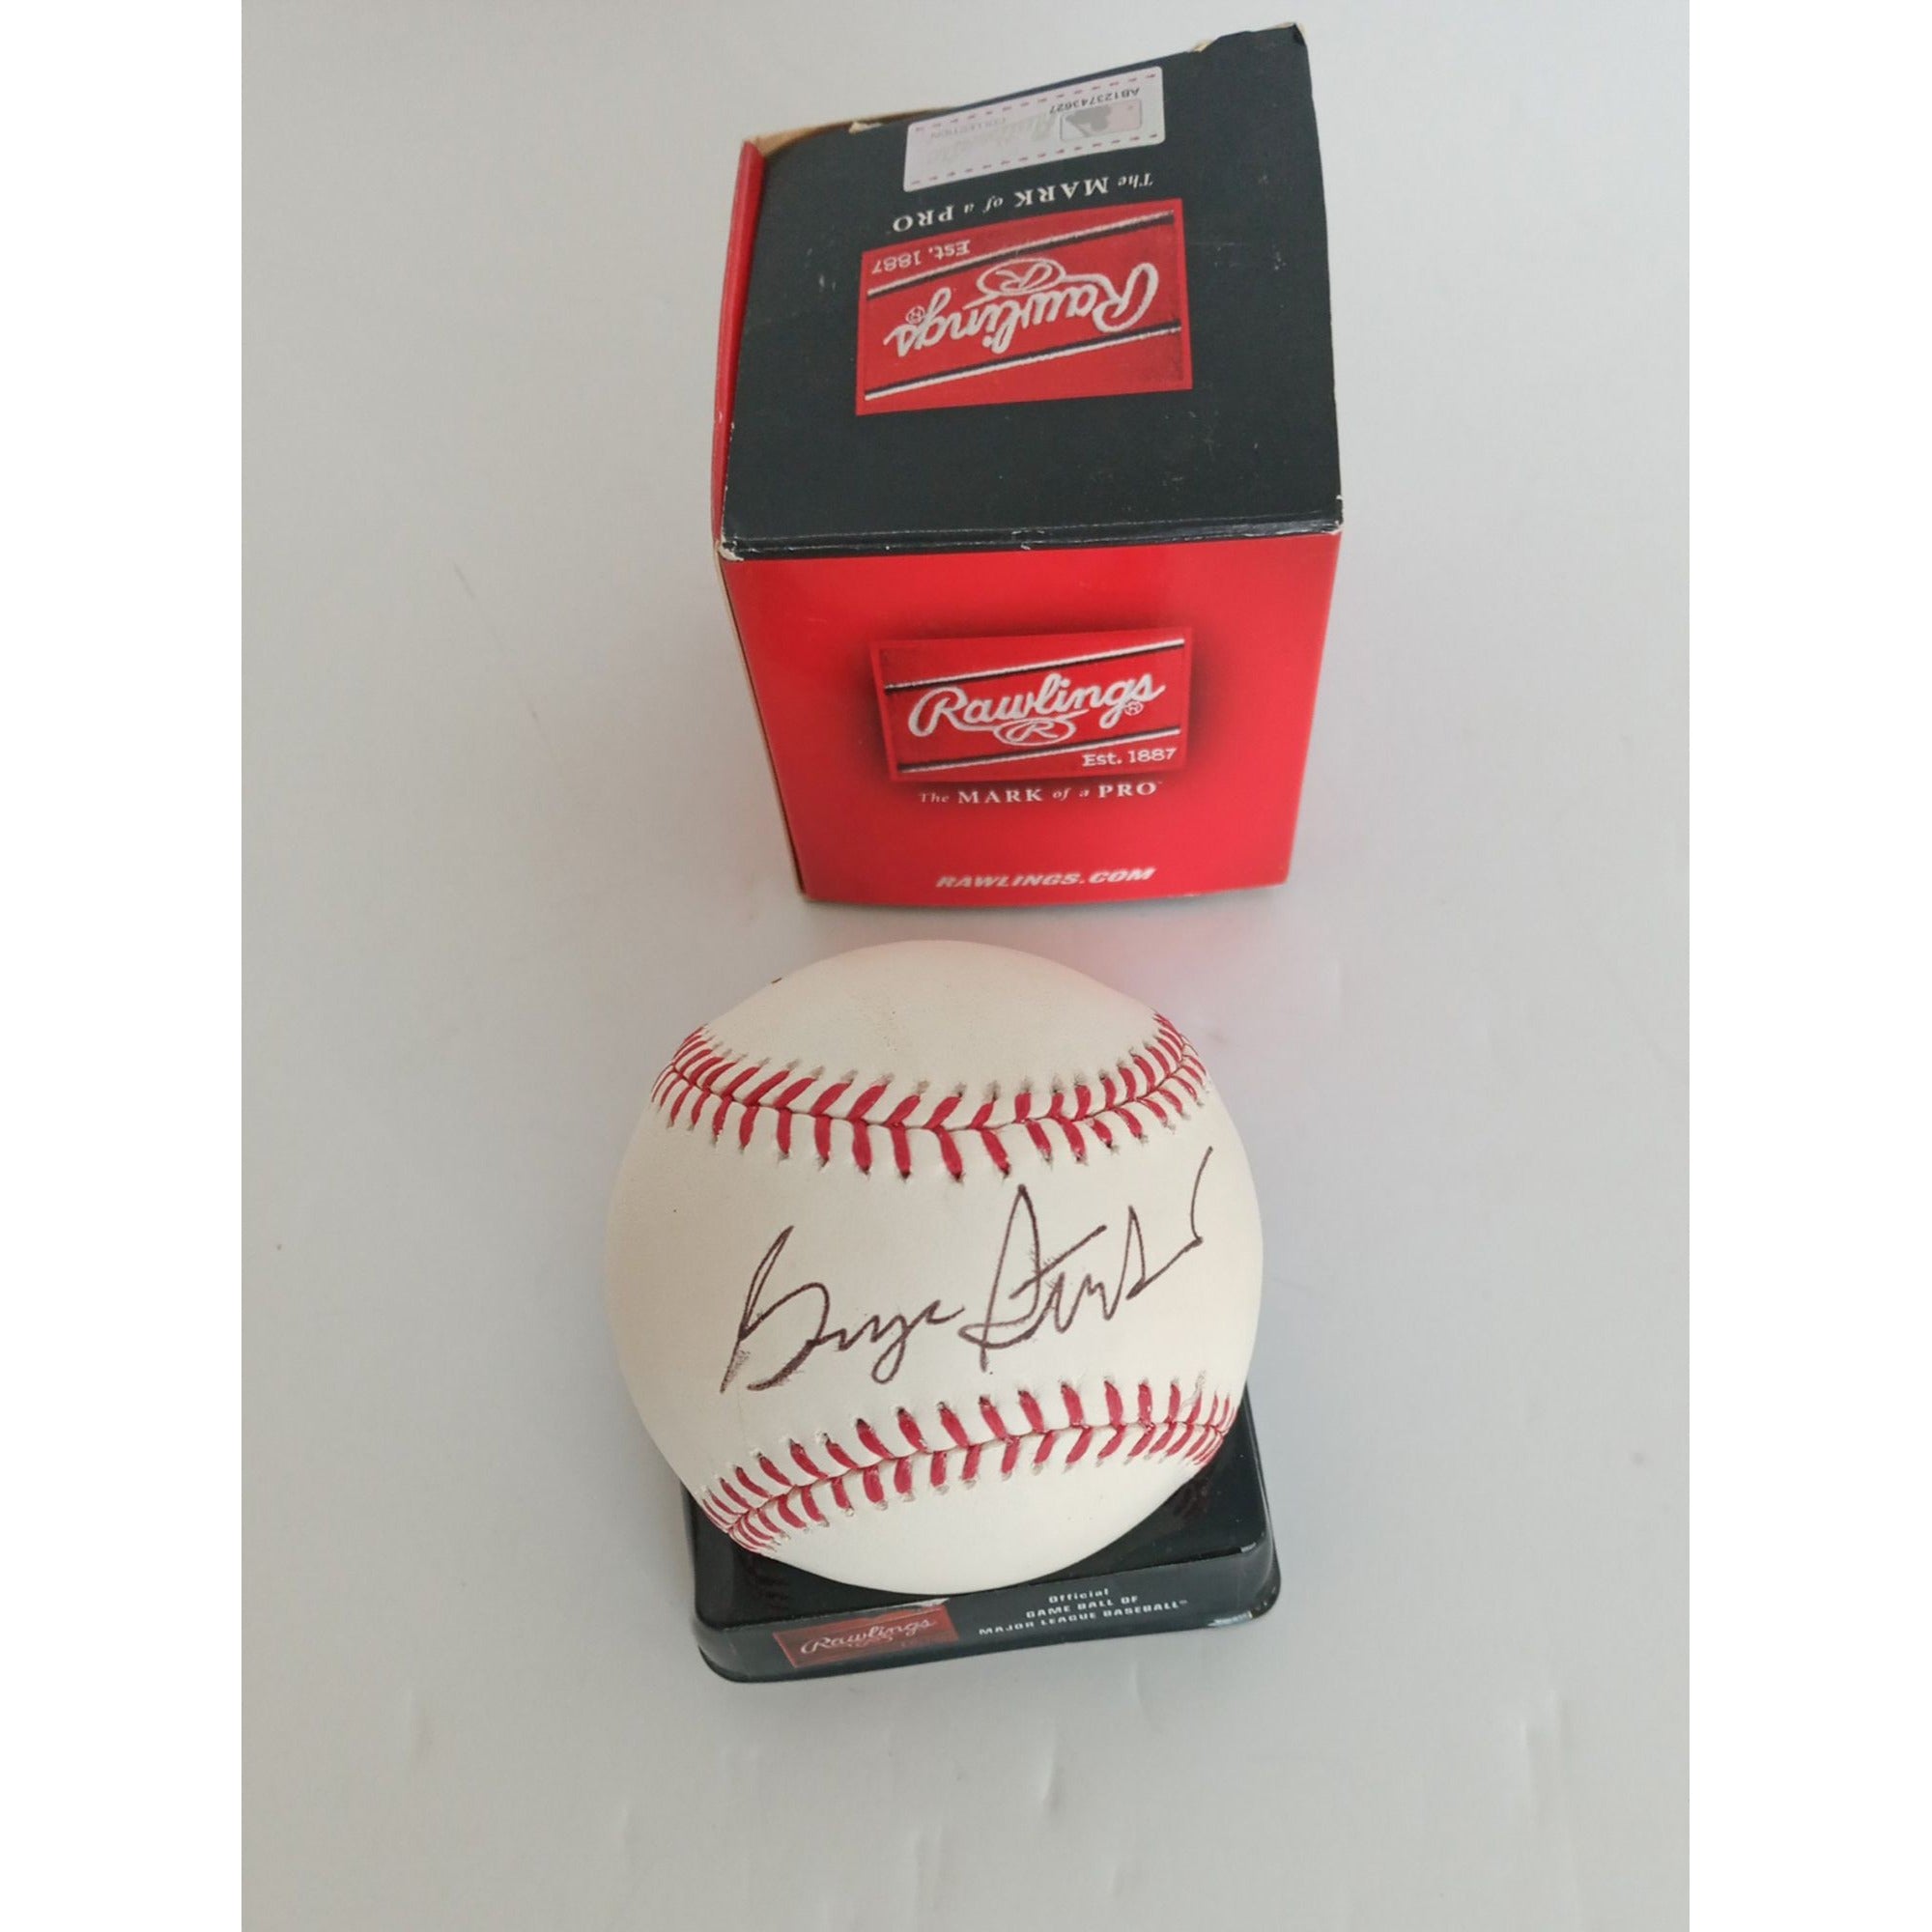 George Steinbrenner New York Yankees MLB baseball signed with proof